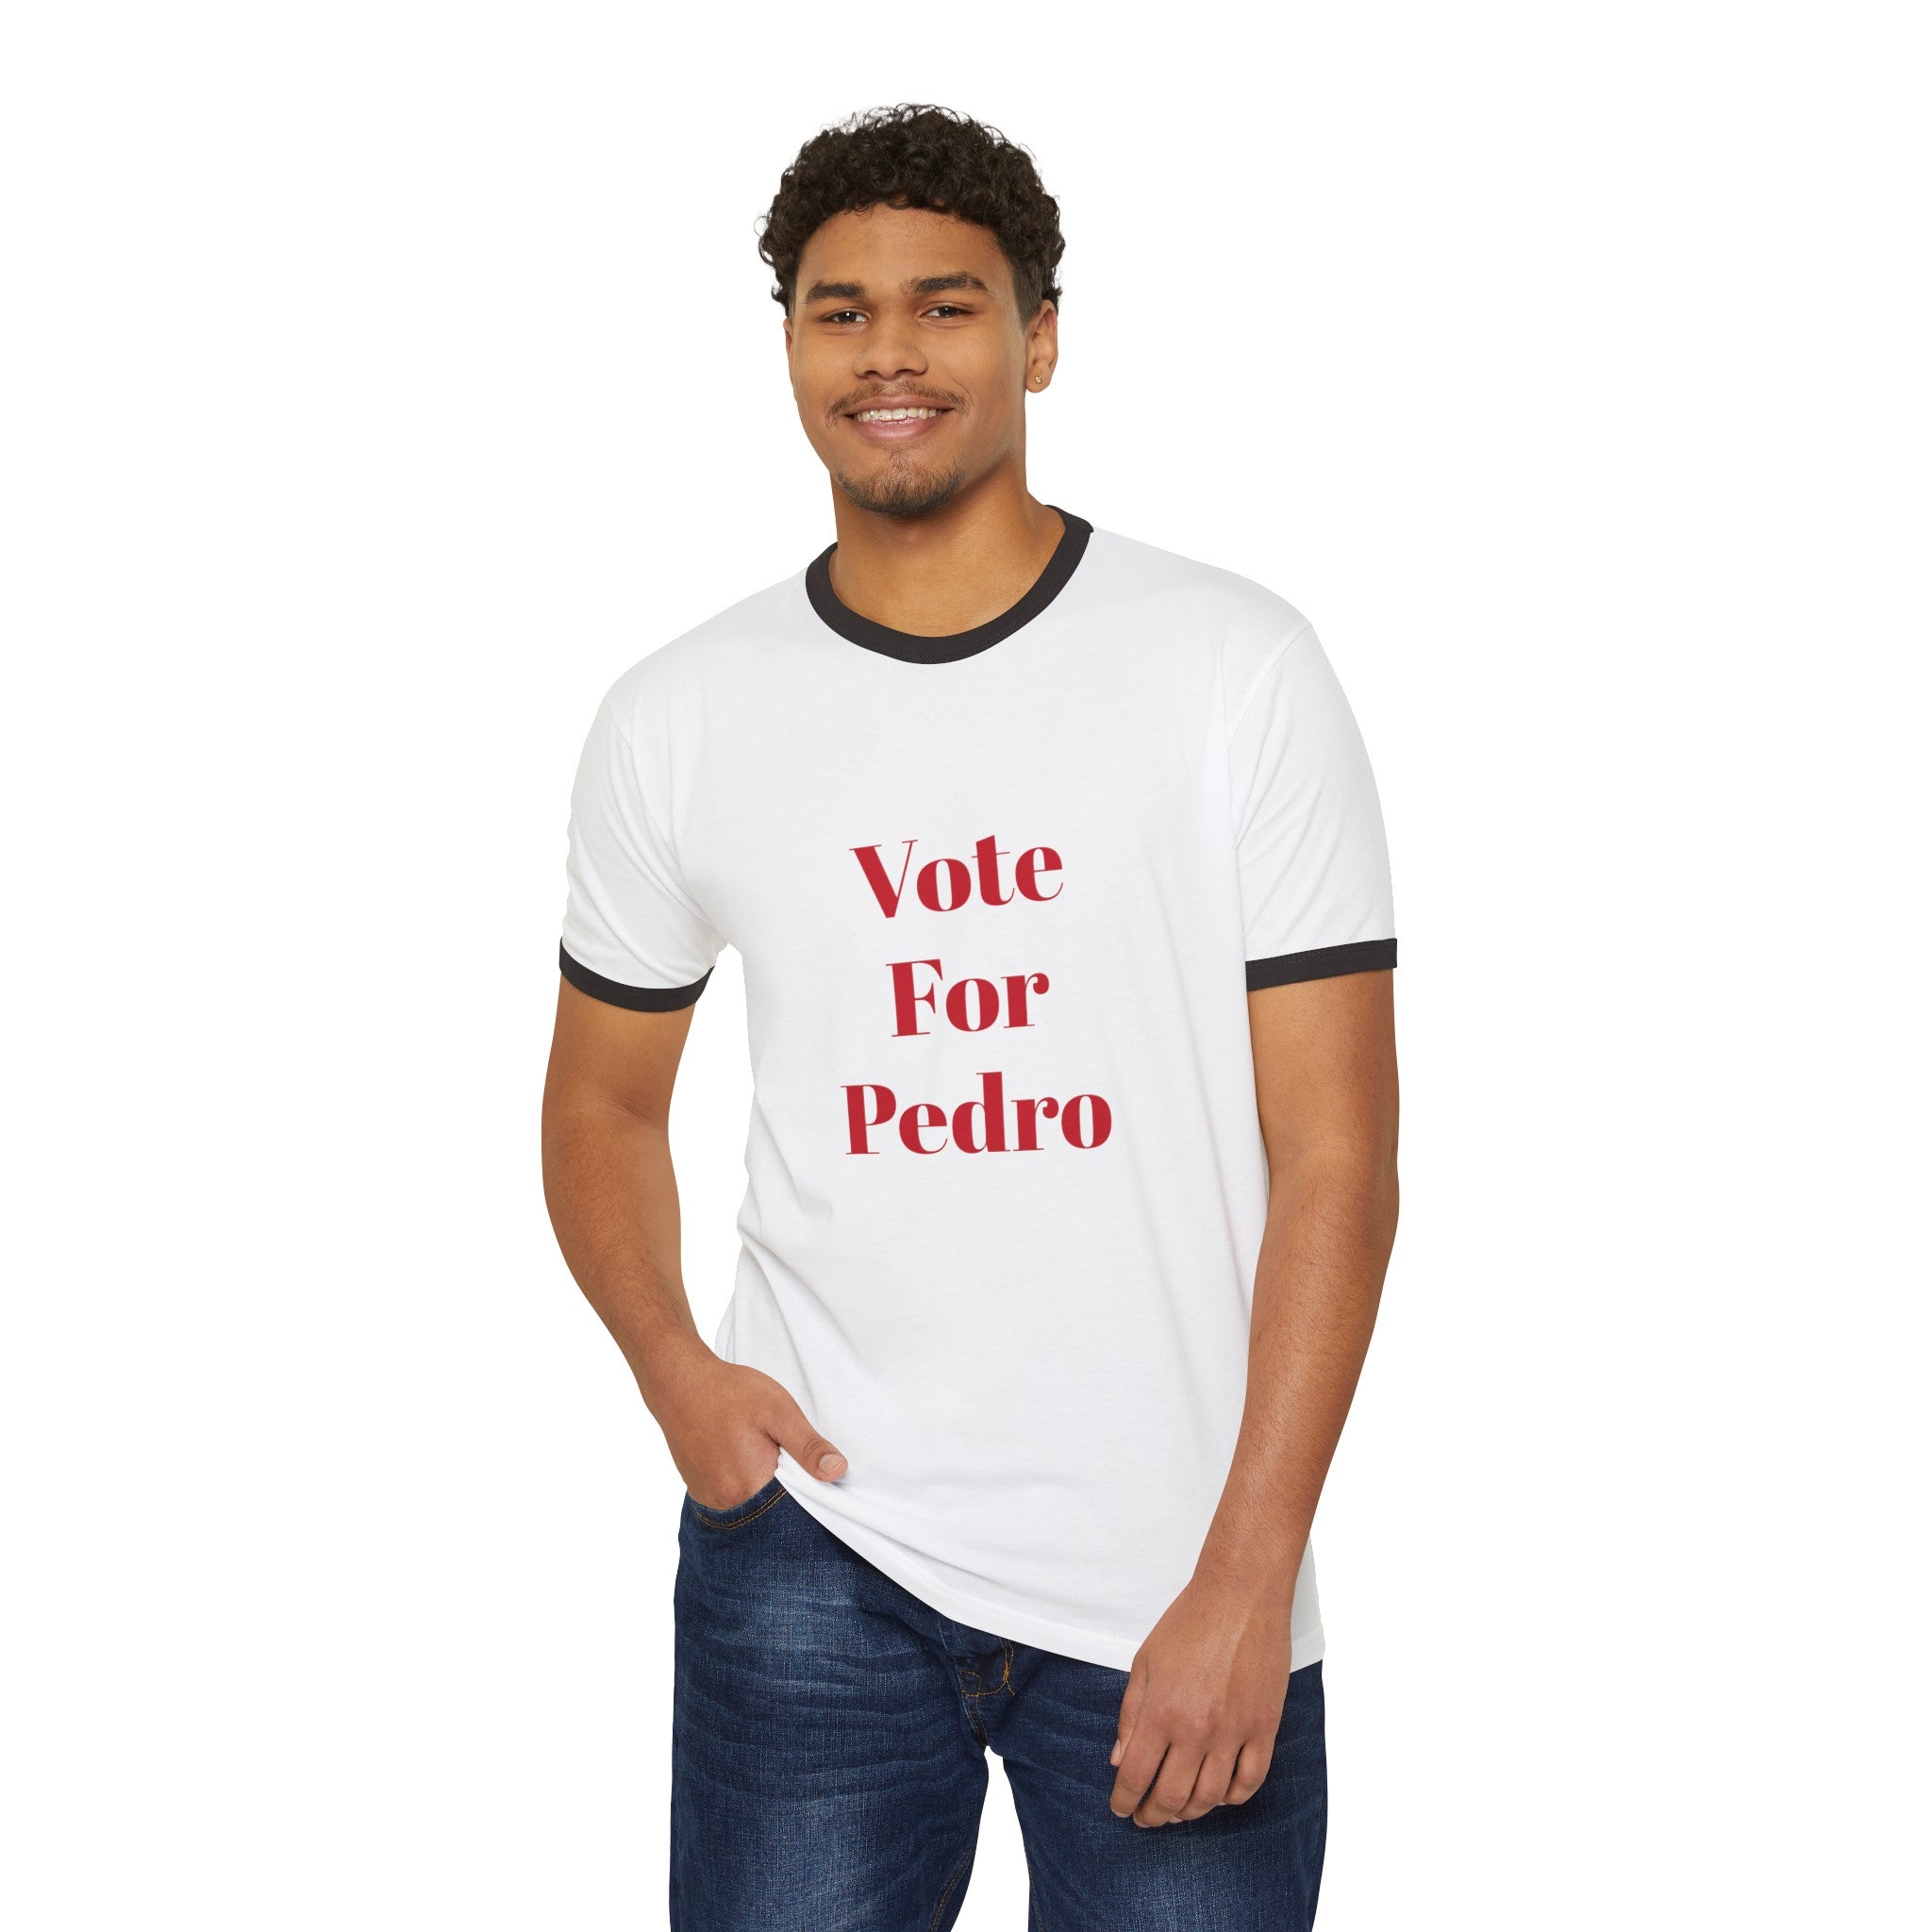 The image features a stylish unisex cotton ringer t-shirt, showcasing the bold "Vote For Pedro" slogan across the front. The contrasting trim on the collar and cuffs highlights the classic ringer style, while the soft cotton fabric promises comfort and a relaxed fit.